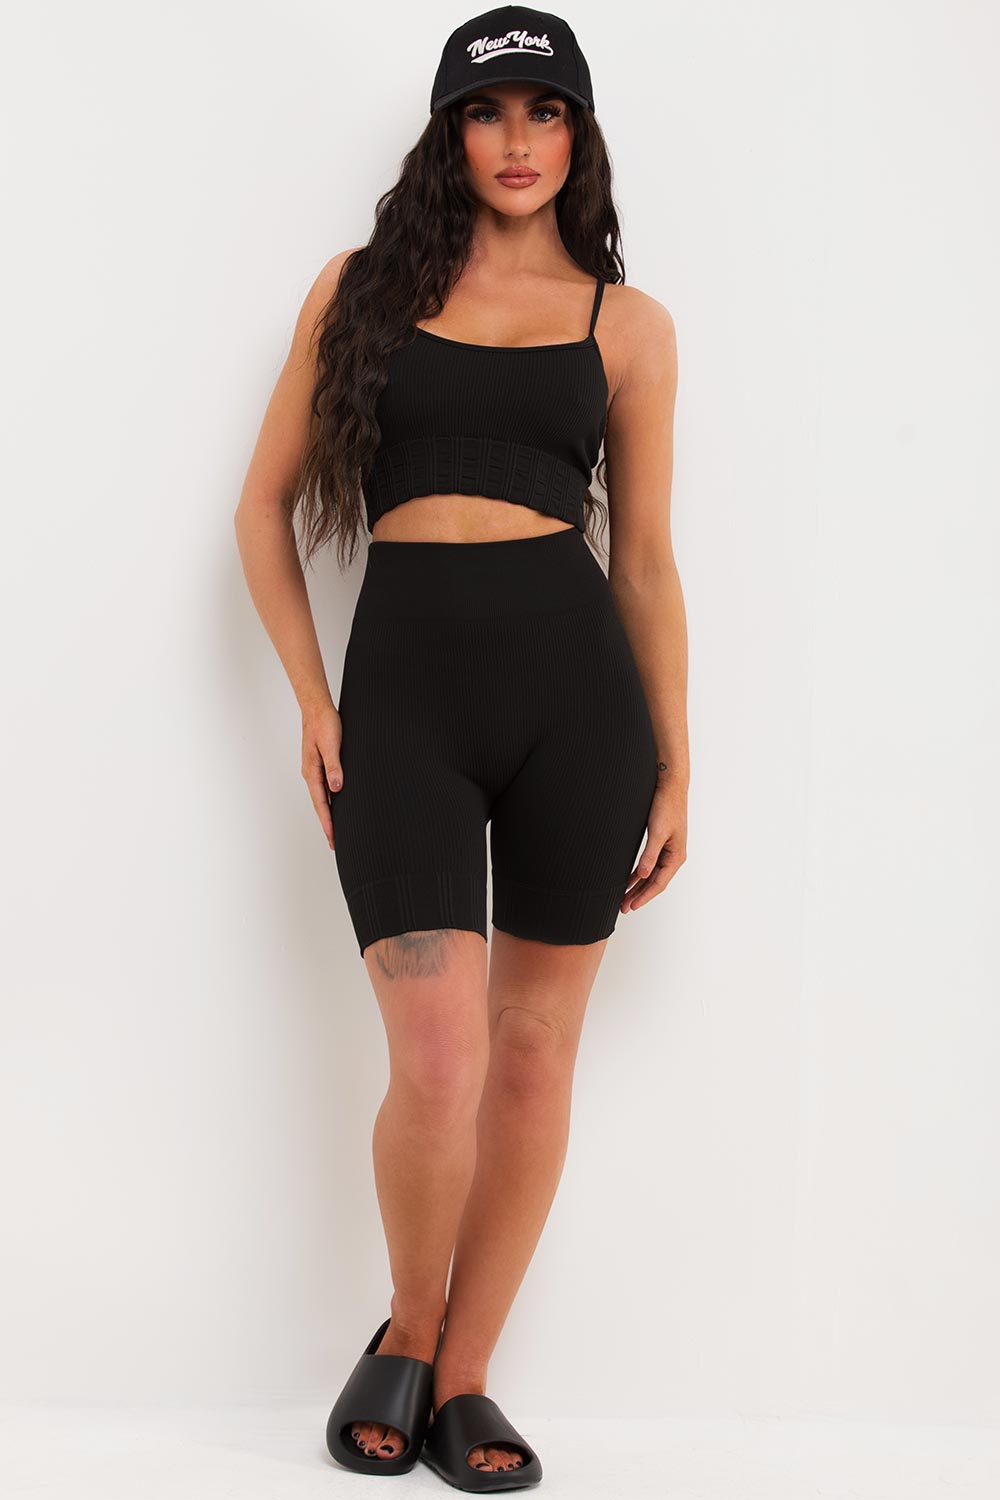 womens black ribbed cycling shorts and crop top gym wear set